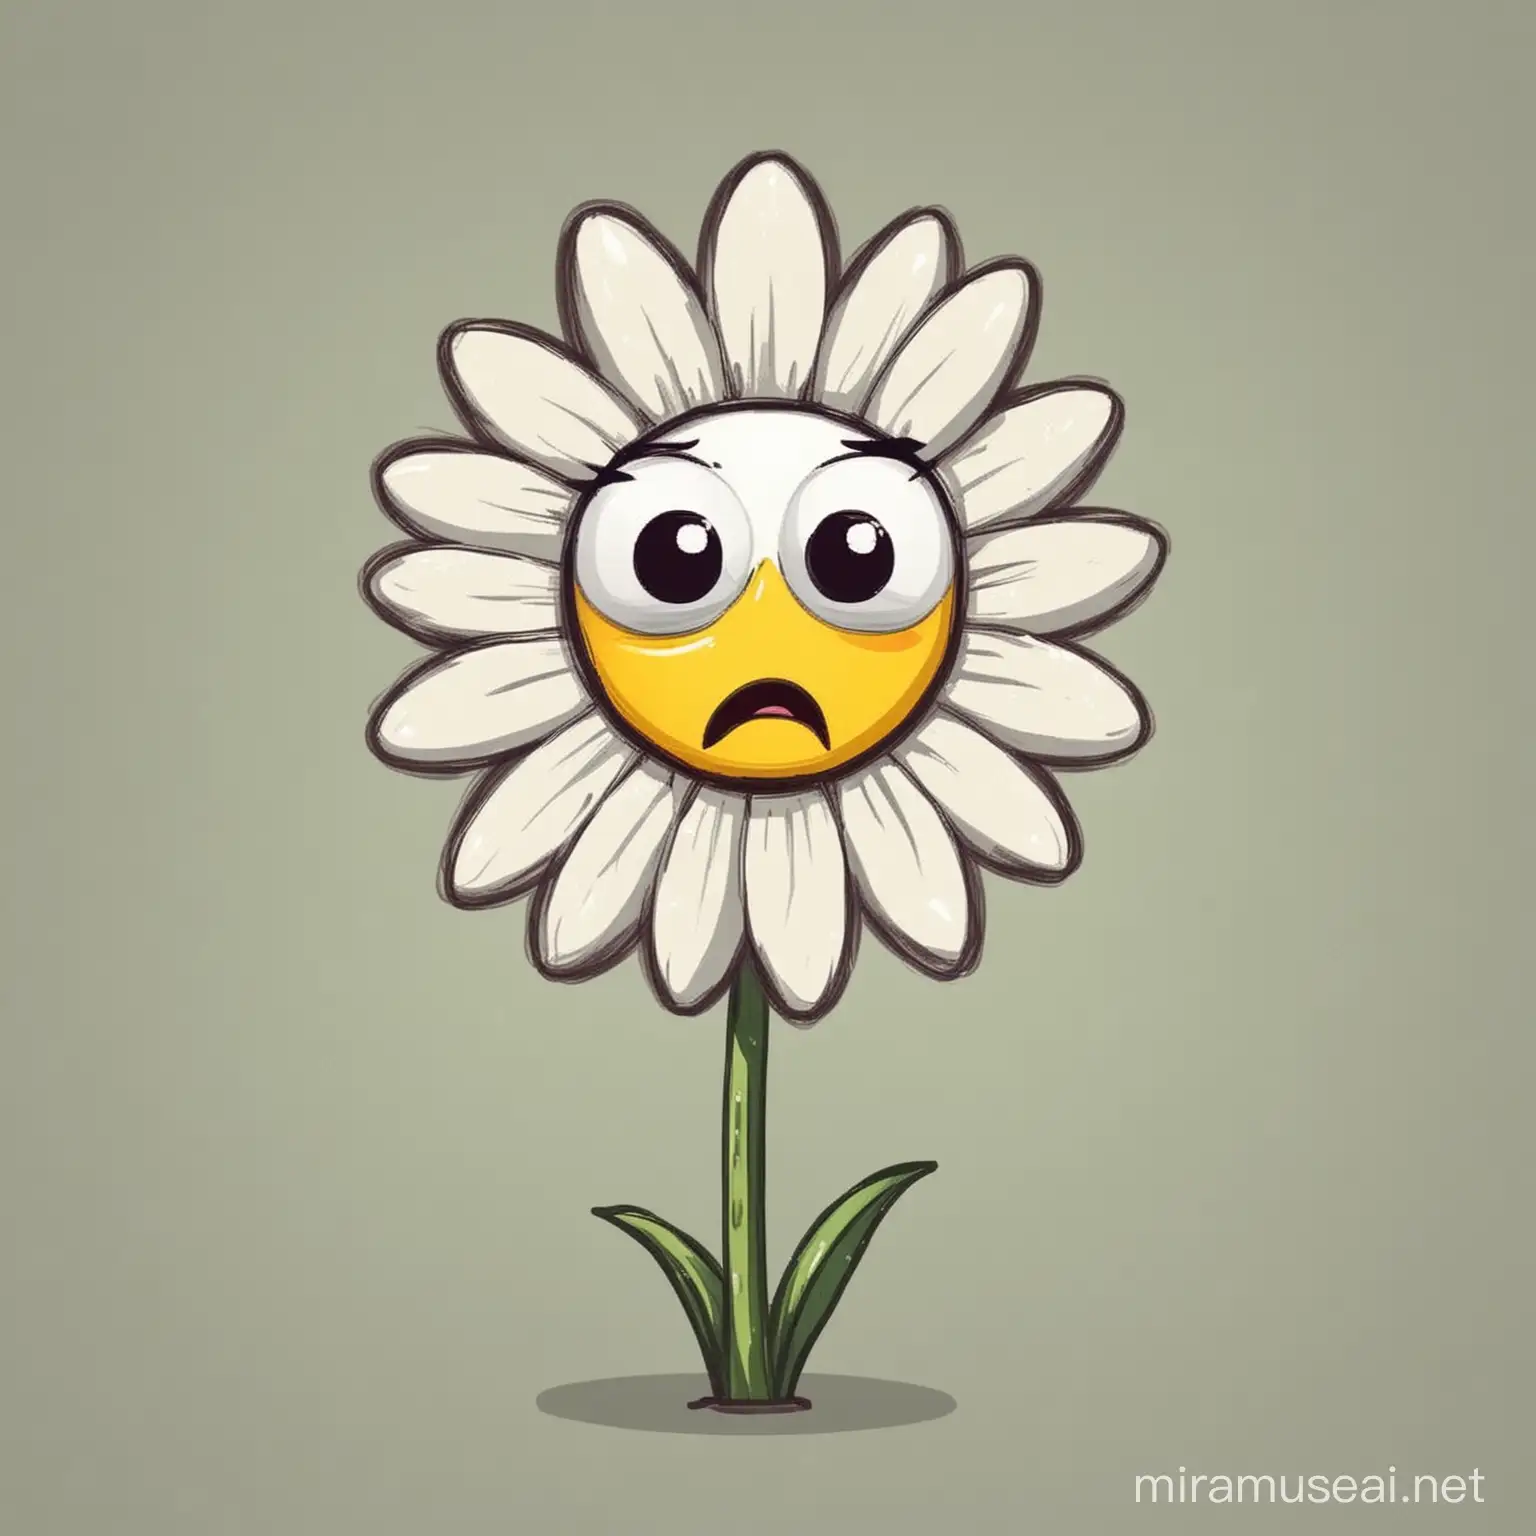 Surprised and Confused Daisy Flower Cartoon Character